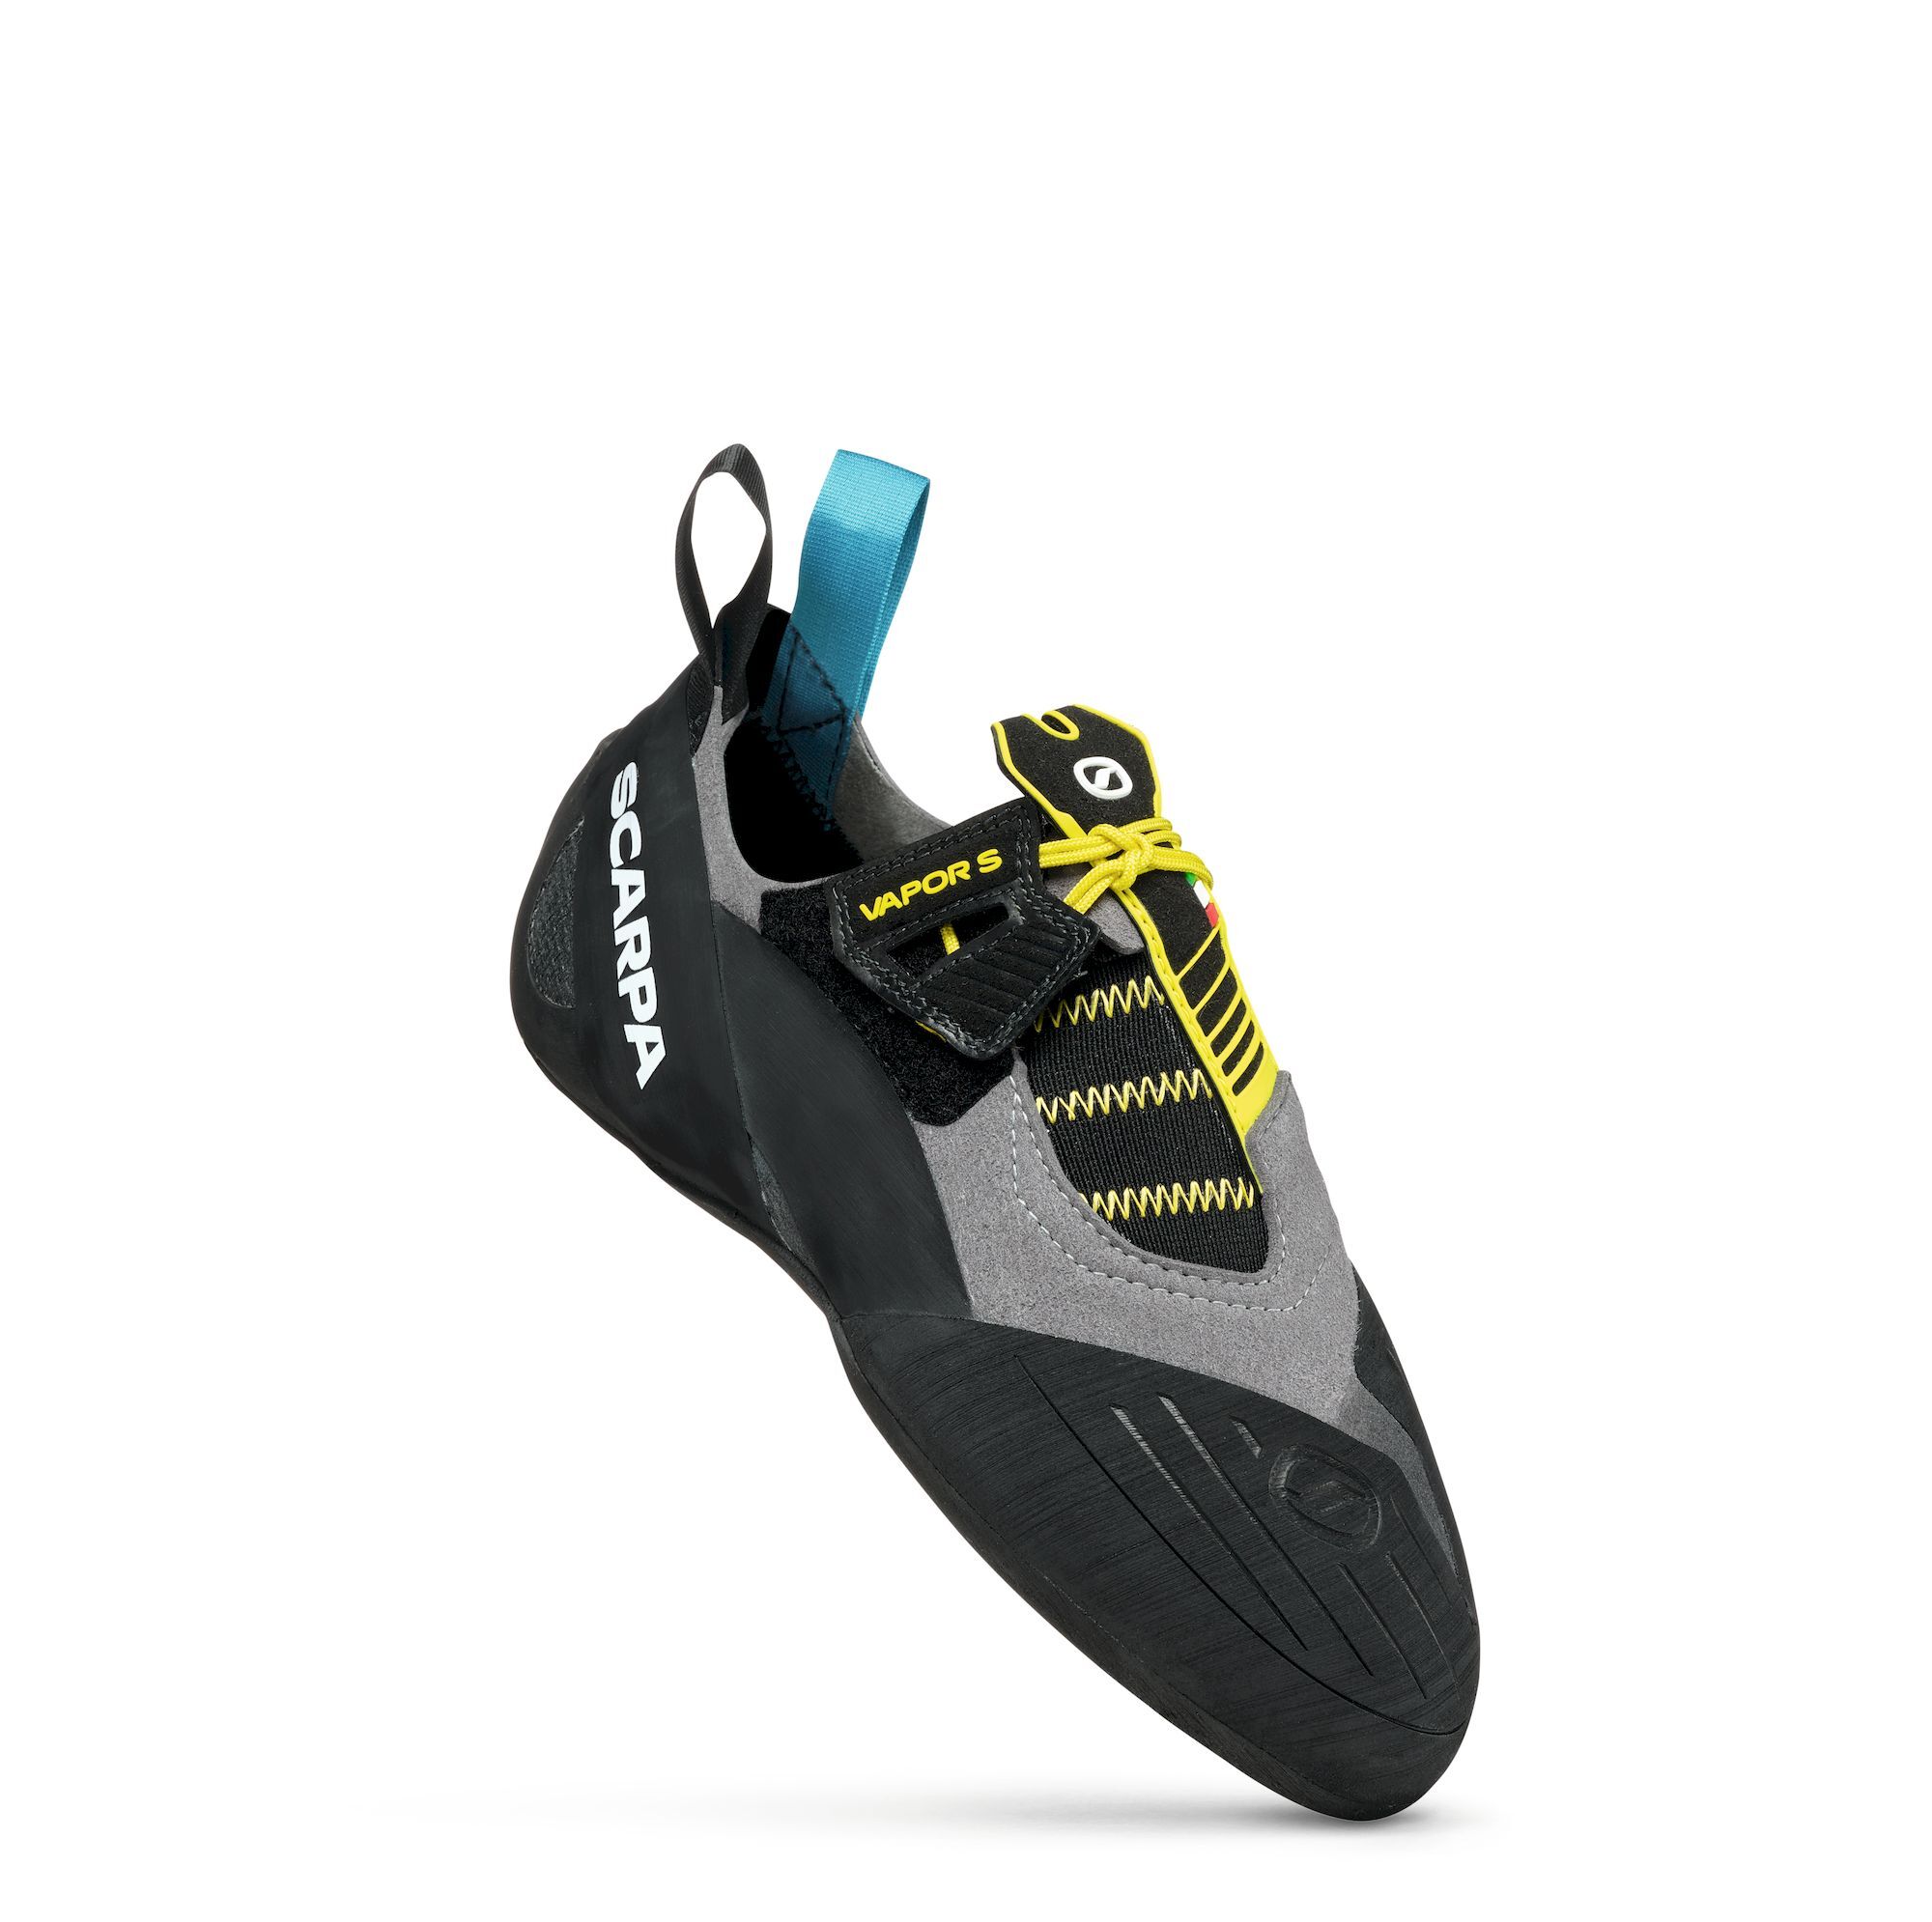 Scarpa Vapor S - Chaussons escalade homme | Hardloop